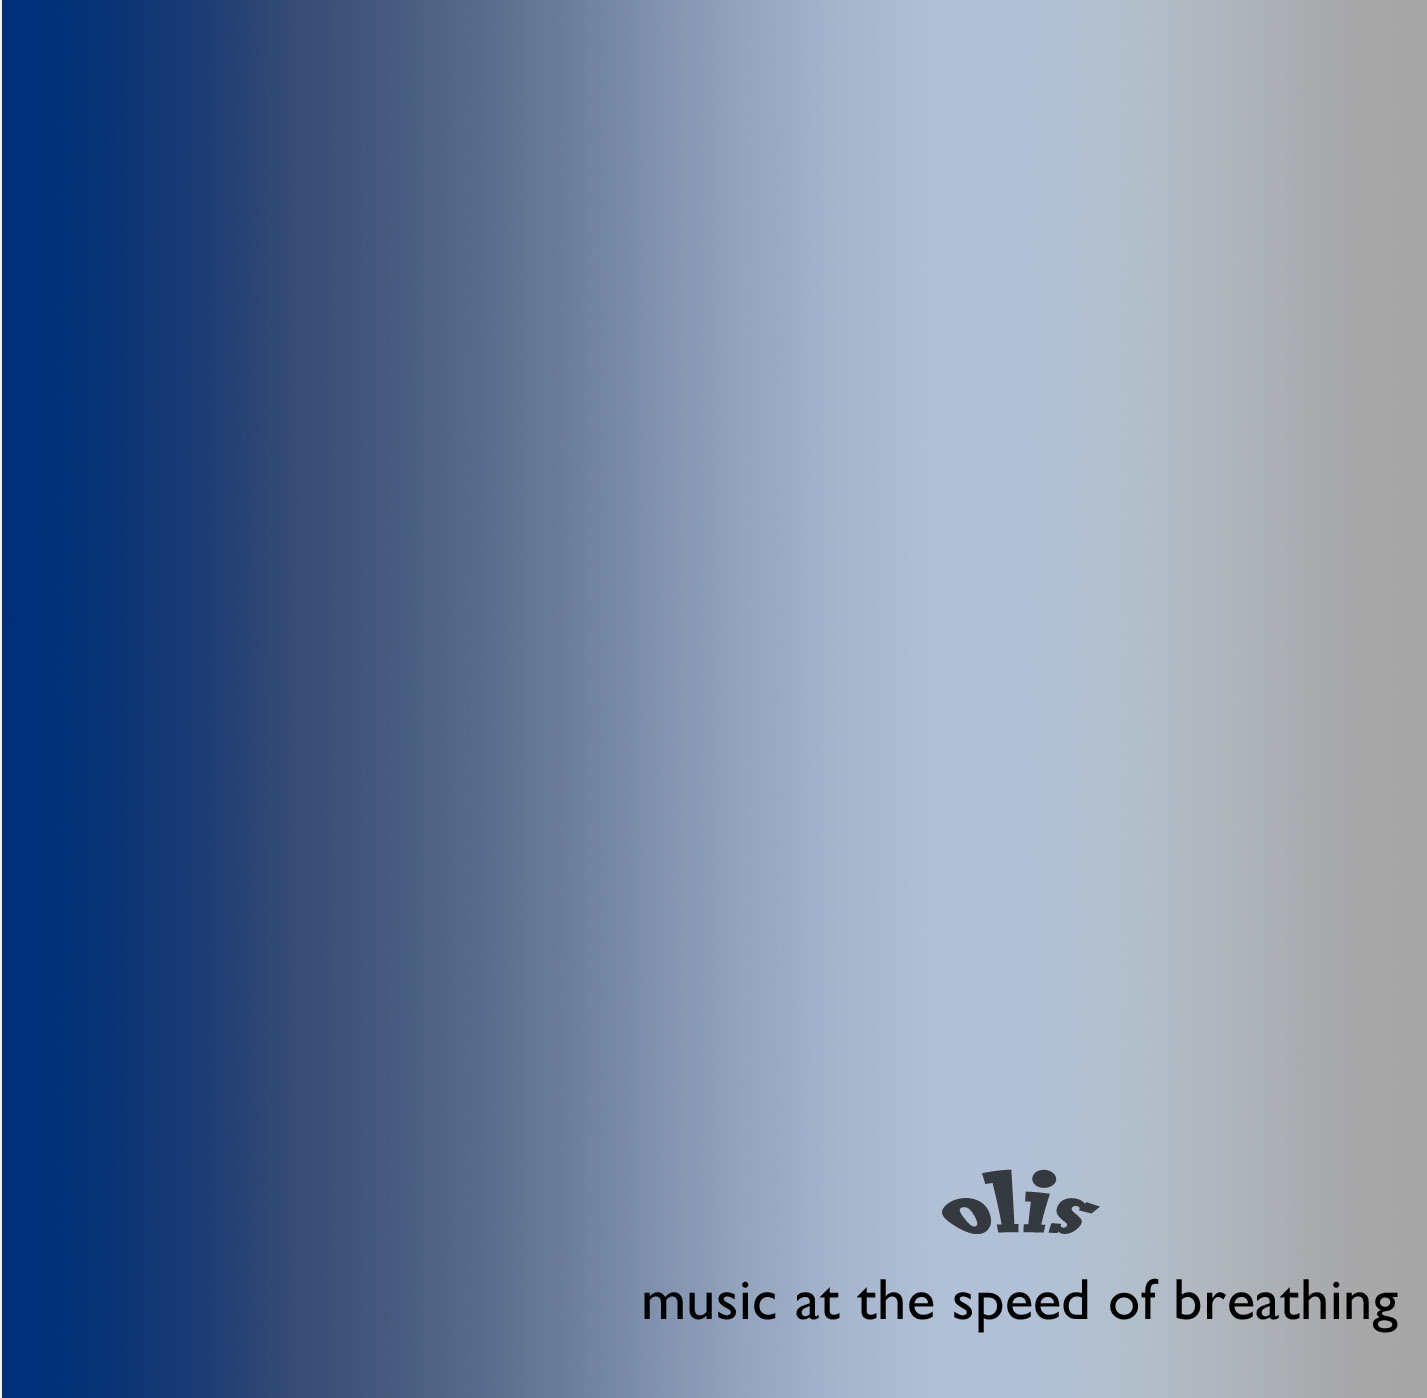 Olis - Music At The Speed Of Breathing - $7